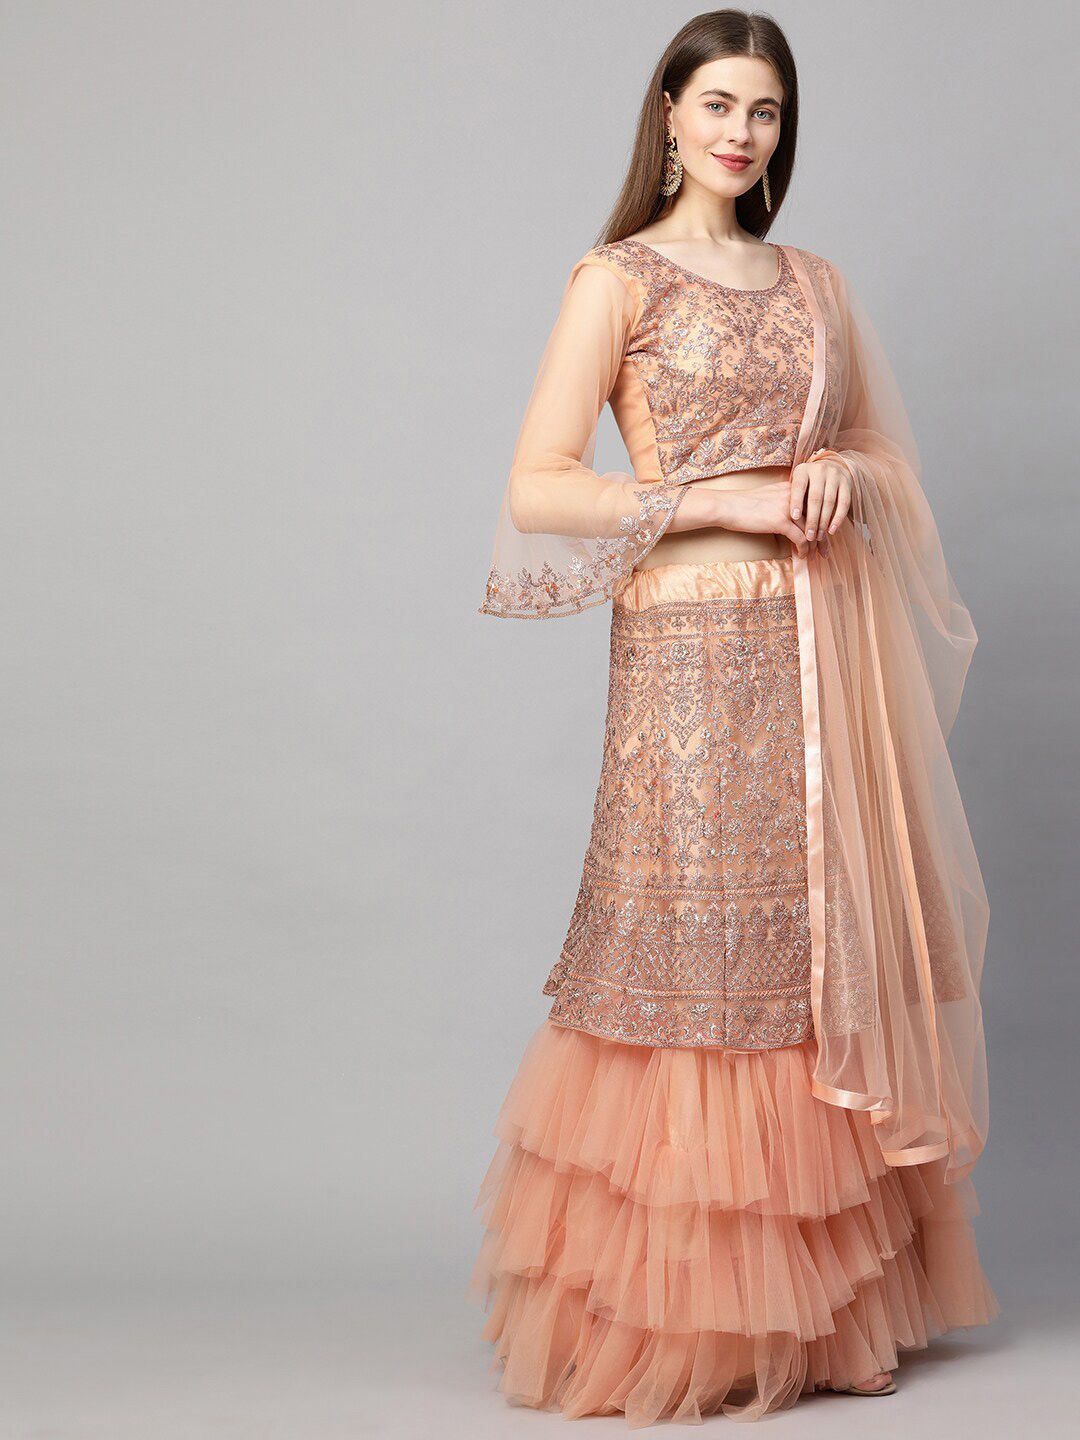 RedRound Peach-Coloured Embroidered Semi-Stitched Lehenga & Unstitched Blouse With Dupatta Price in India